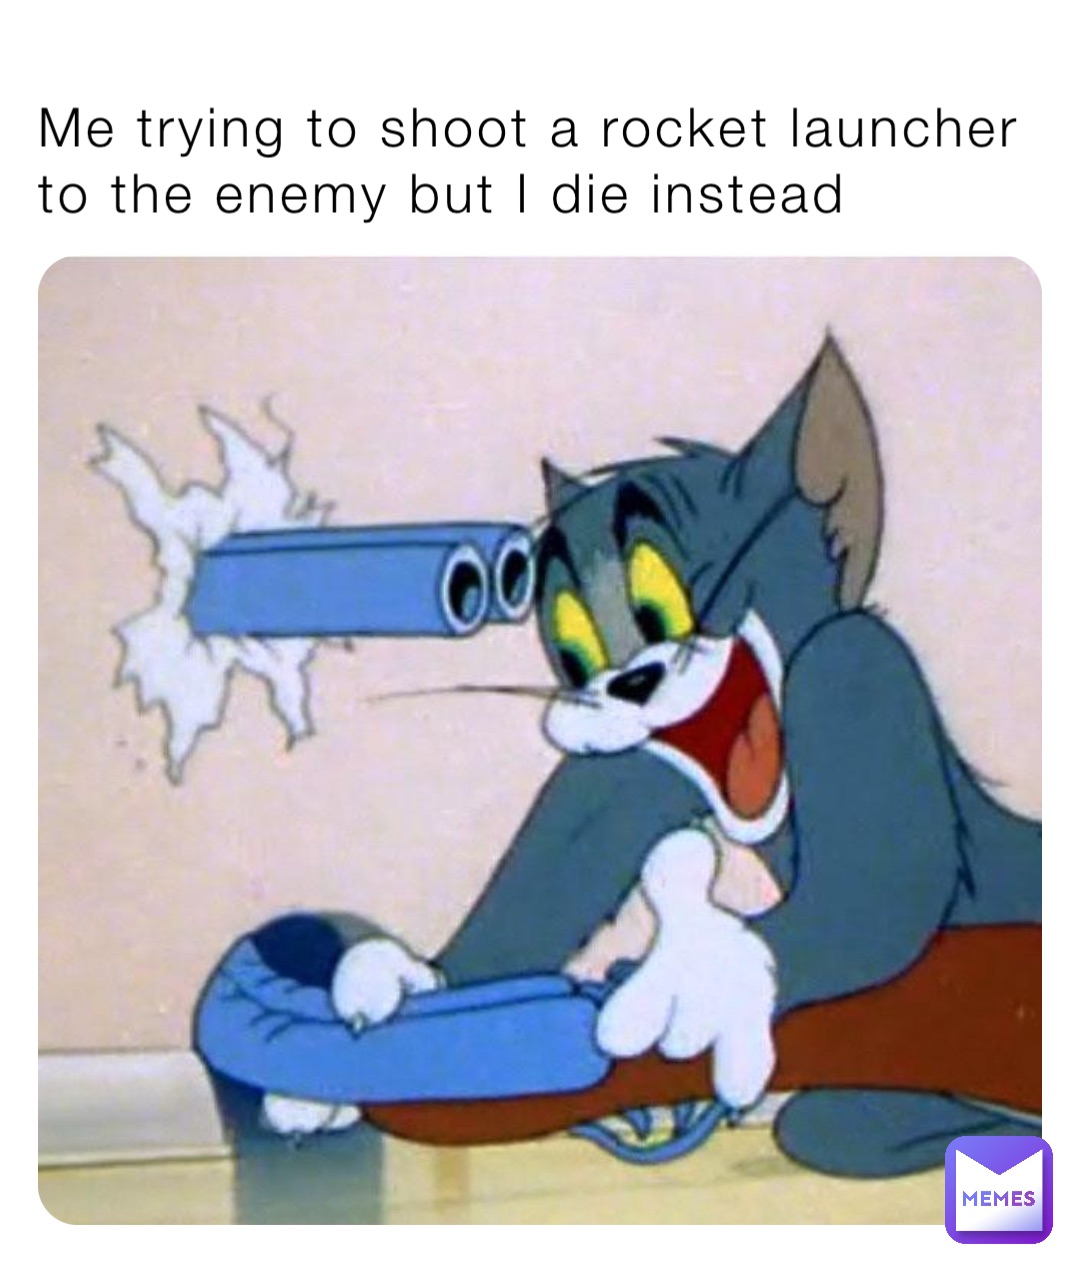 Me trying to shoot a rocket launcher to the enemy but I die instead